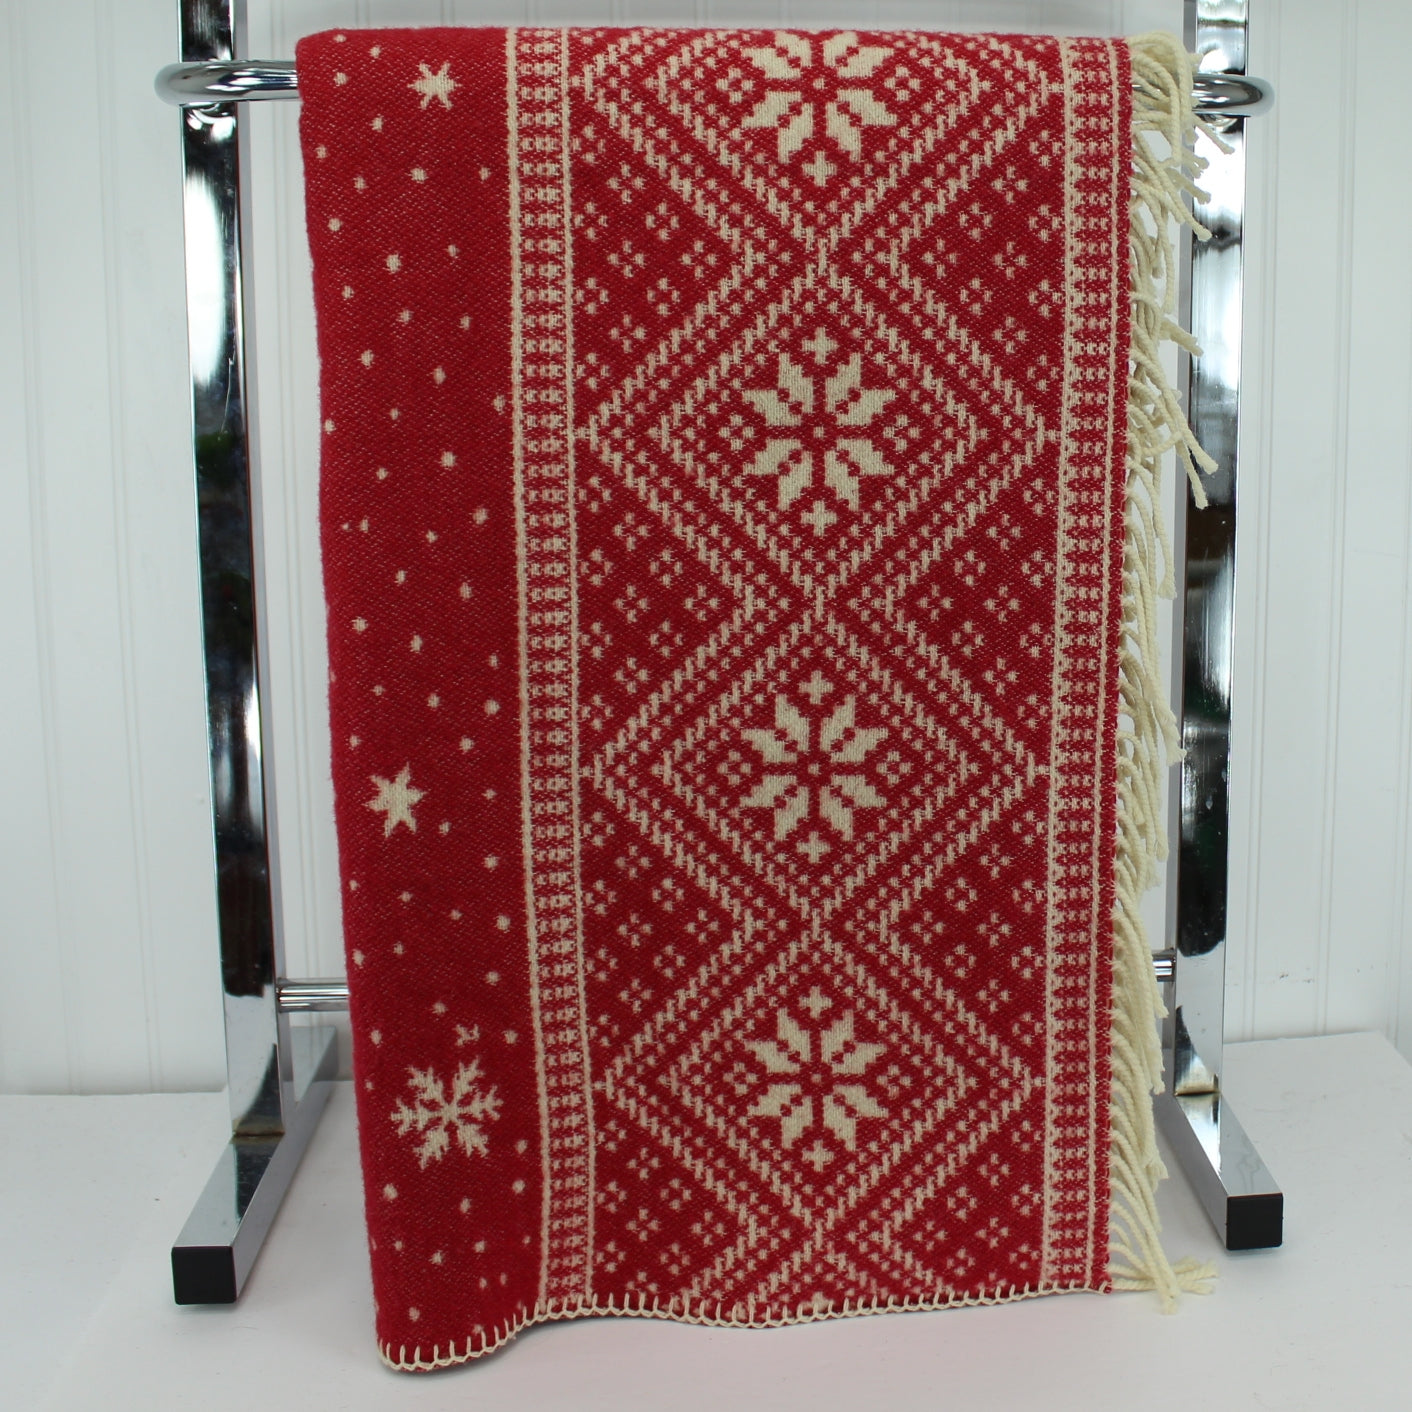 Coming Home Wool Throw Holiday Winter Snowflake Design Red White 2 Available